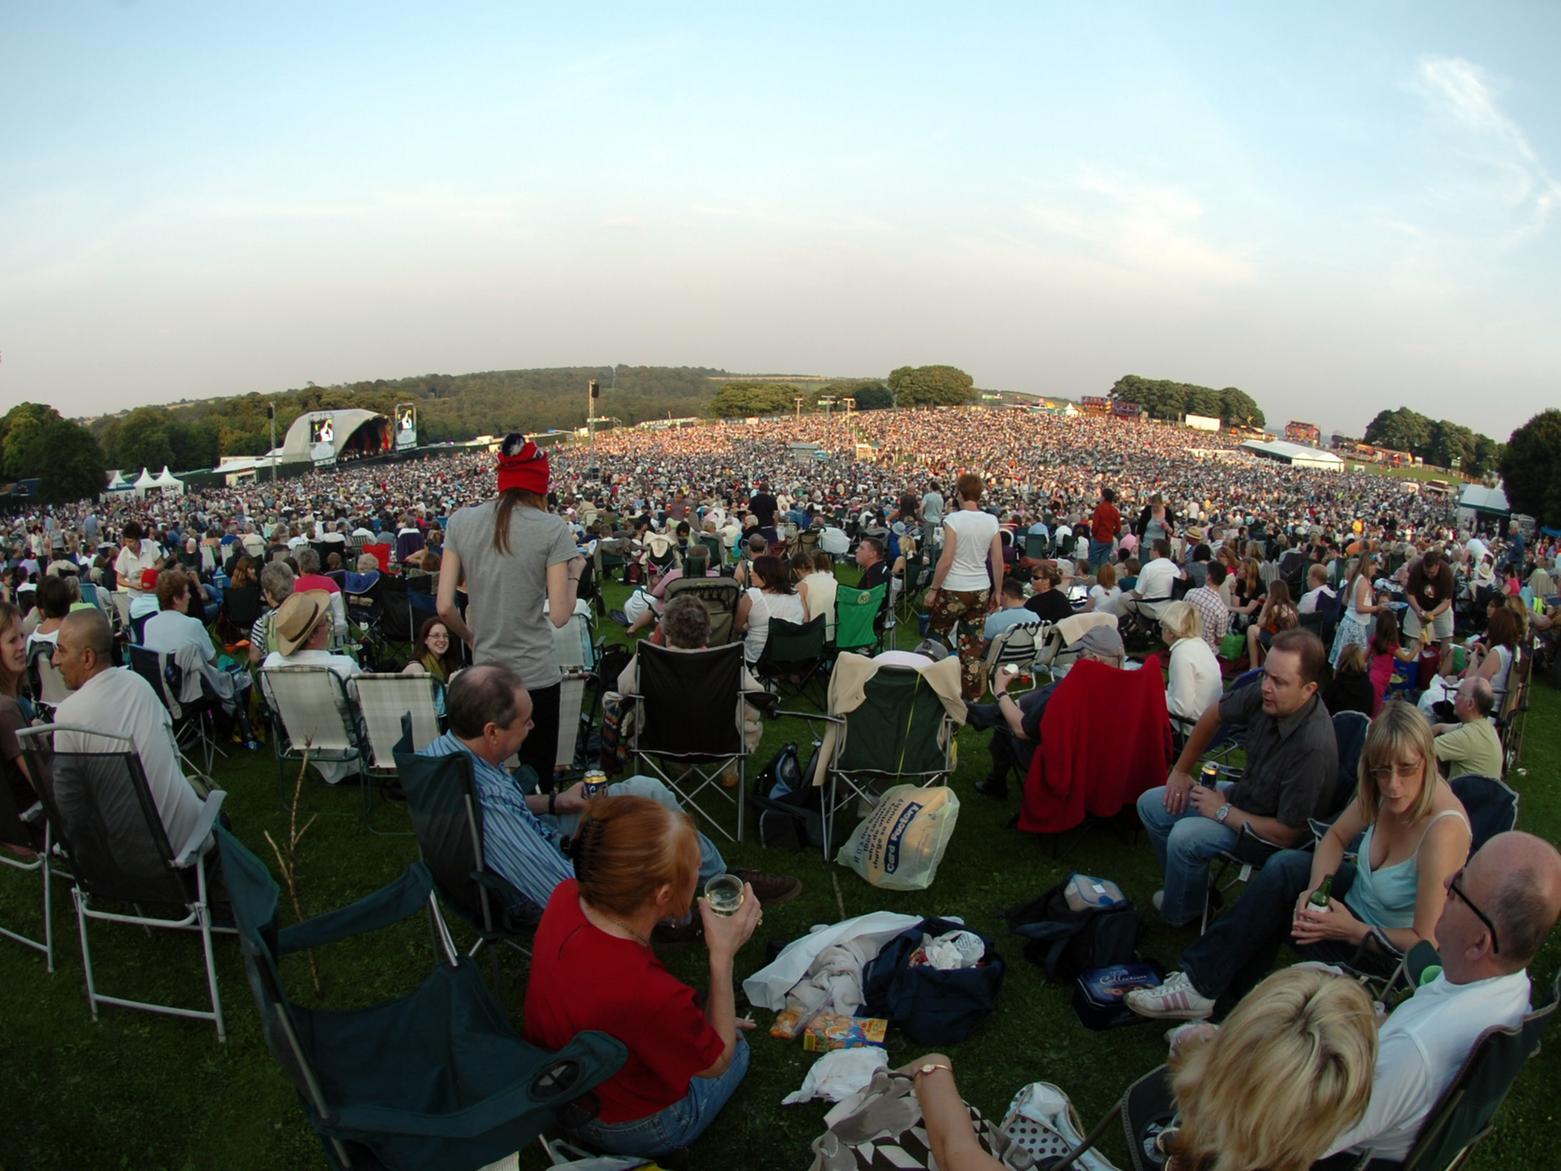 Opera fans flocked to Temple Newsam for thise annual celebration of the musical genre. Alfie Boe and Katherine Jenkins were just two of the big names to perform over the years. Cancelled in 2014.